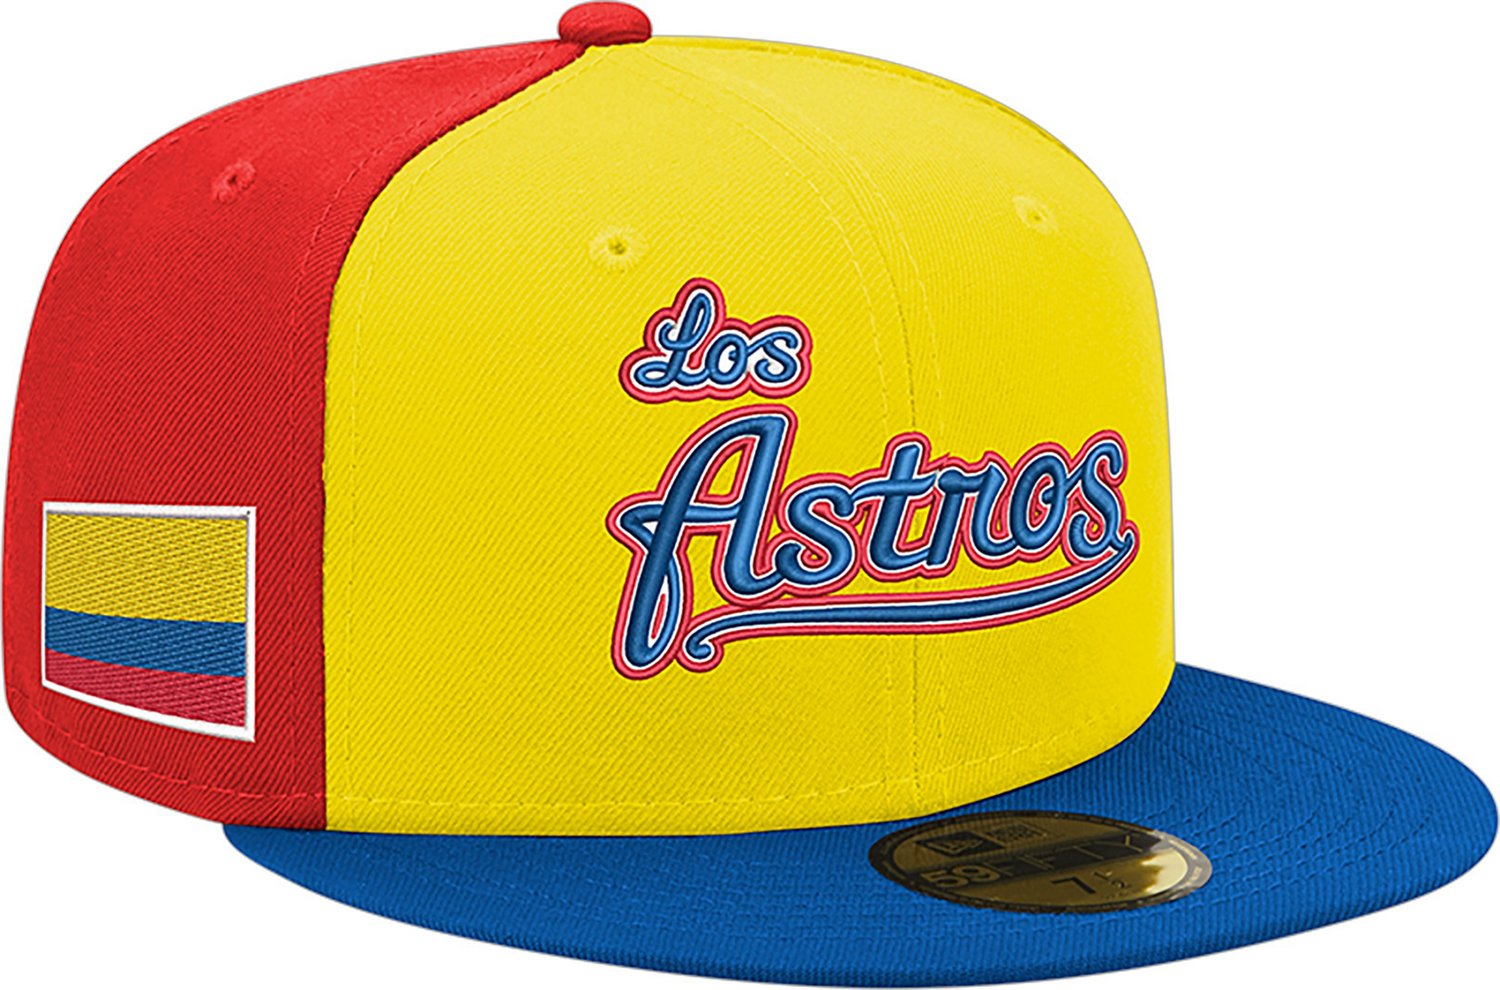 Academy Sports + Outdoors Launches Houston Astros Mi Patria Collection in  Celebration of Hispanic Heritage Month